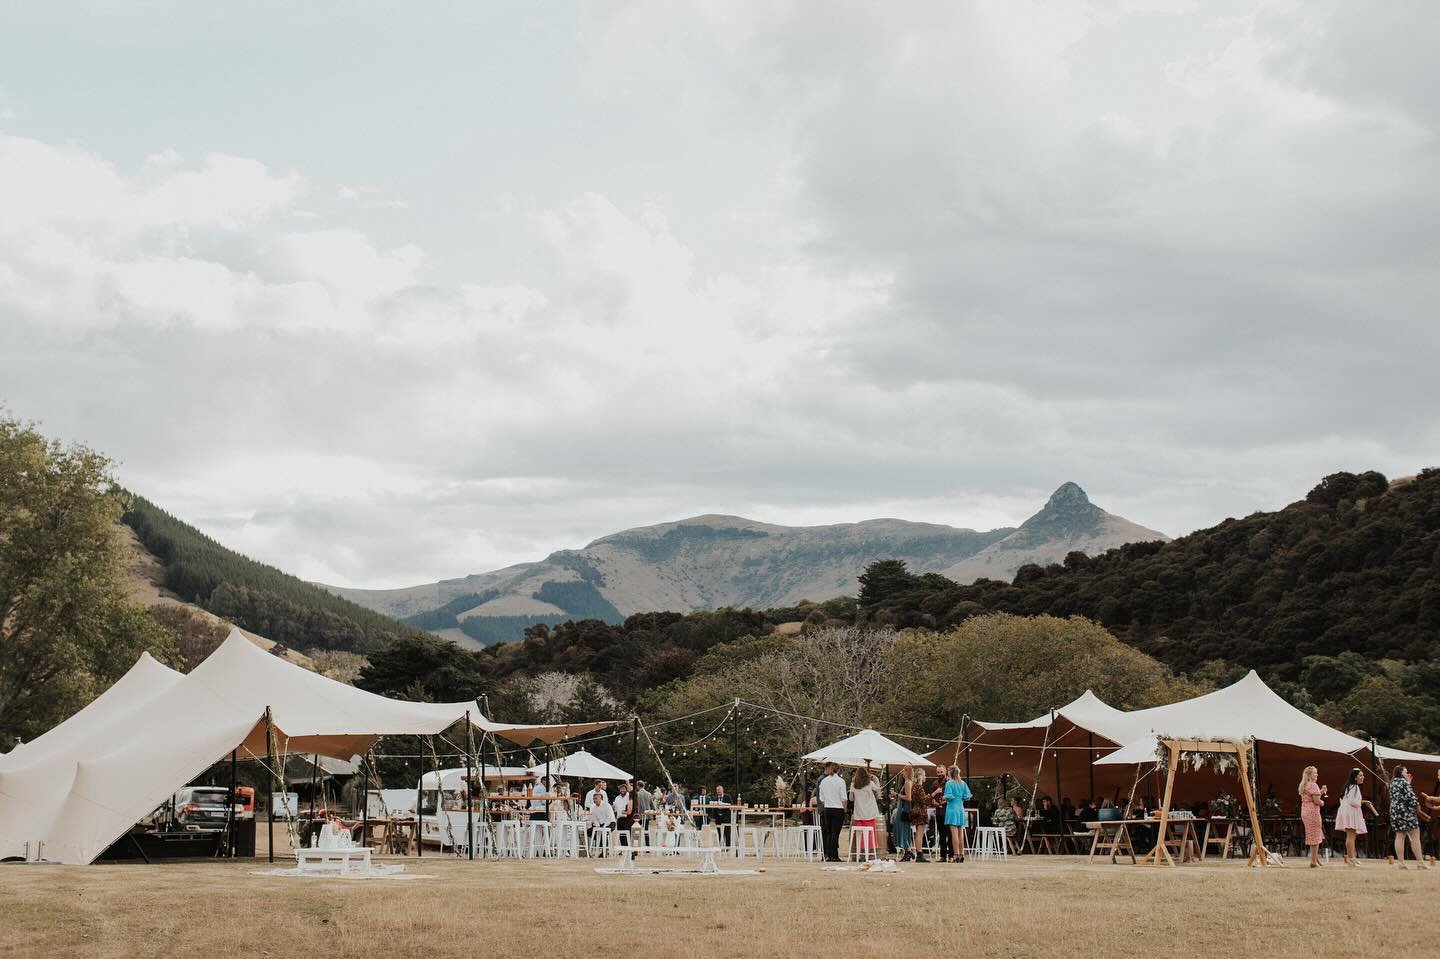 It&rsquo;s not a want, it&rsquo;s a need!

Where nature meets innovation, and celebrations unfold beneath a canvas that seamlessly fits in amongst the landscape. Our Nomad marquees redefine versatility, offering a unique ability to mold and adapt to 